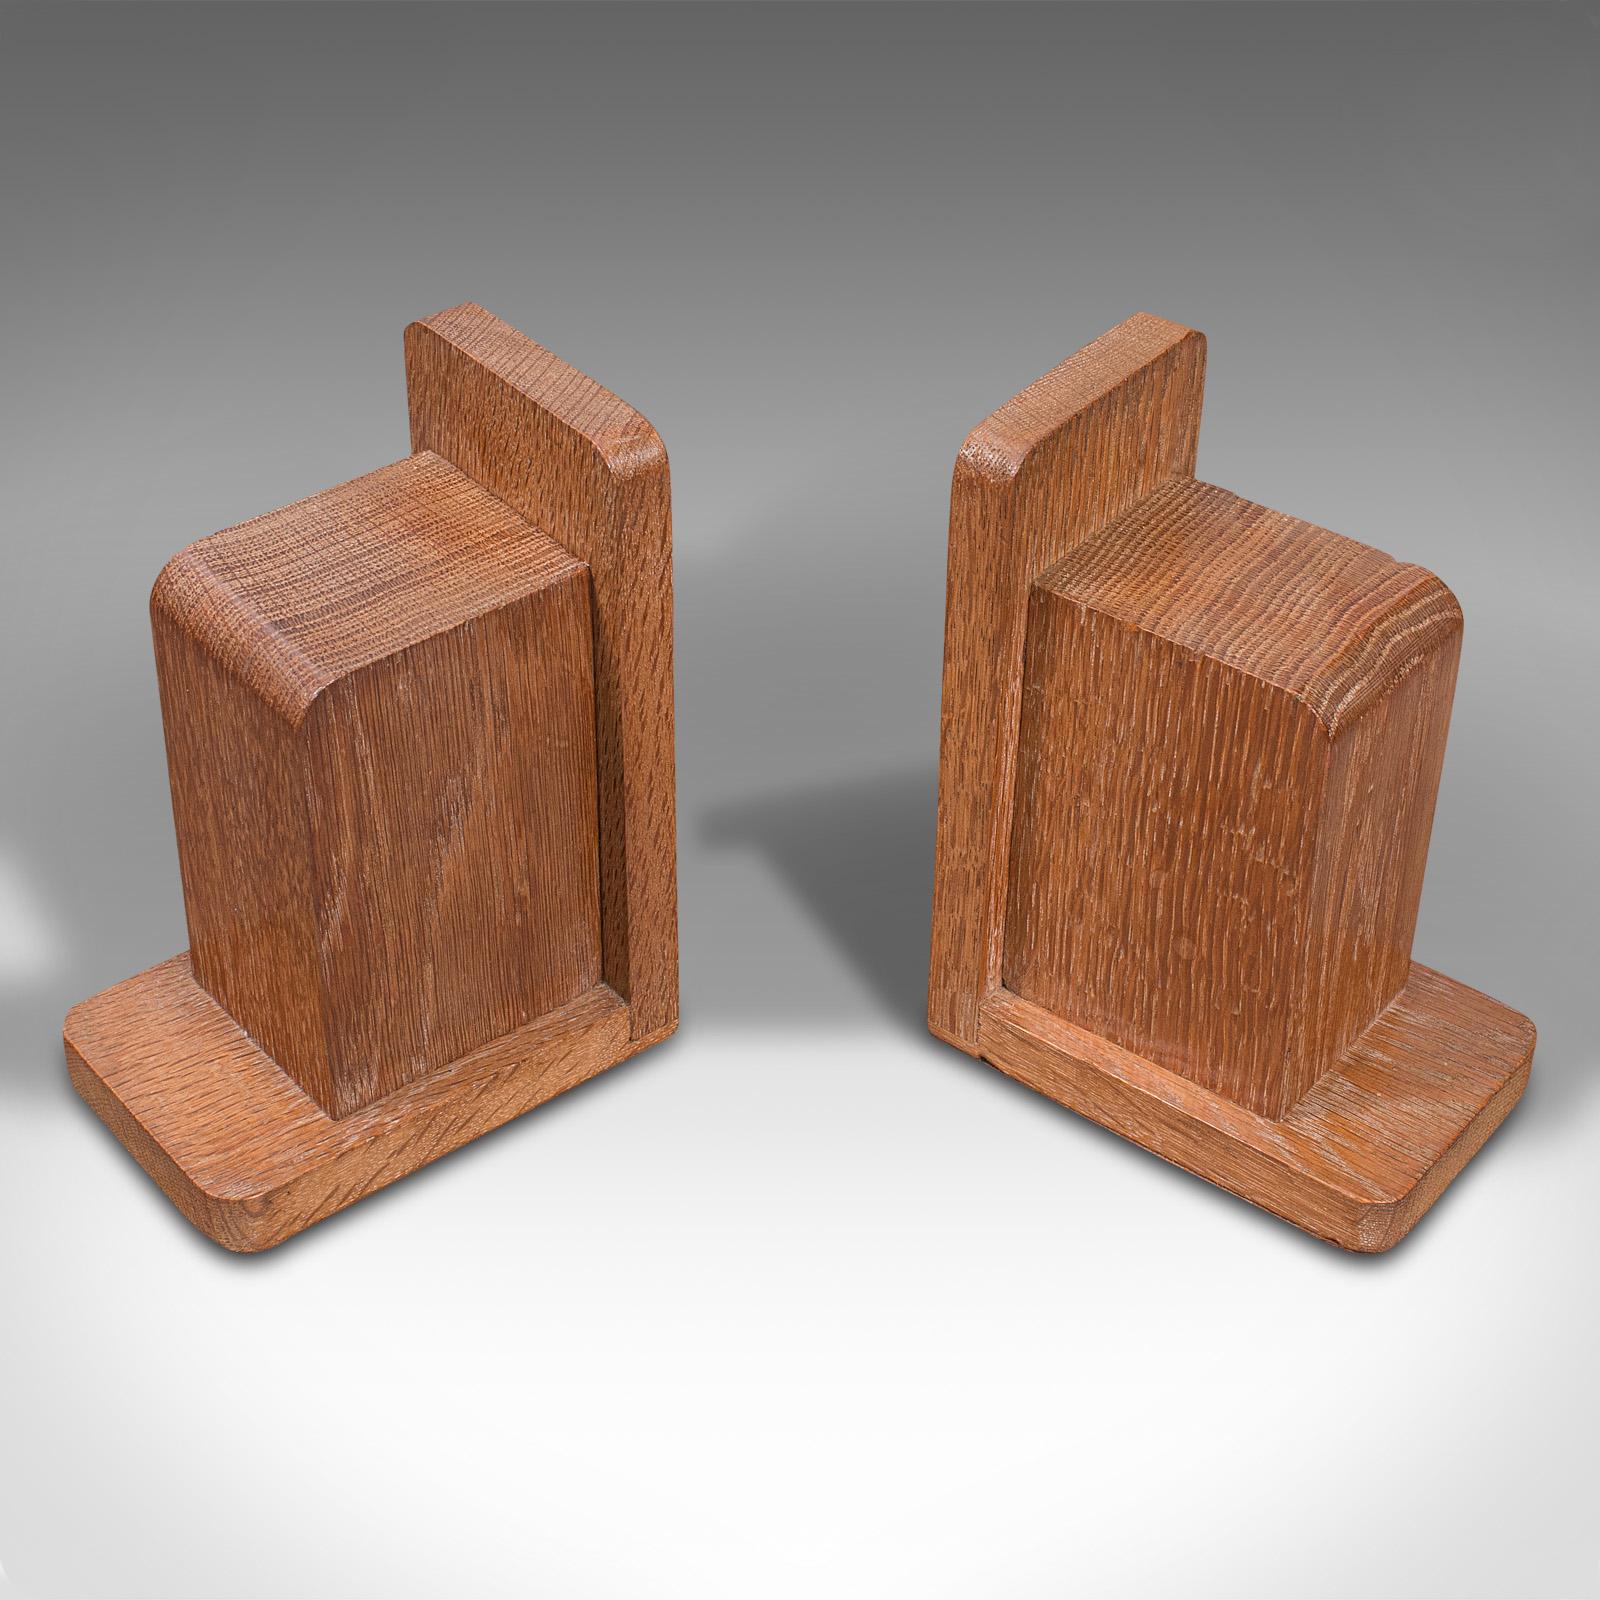 British Pair of Vintage Decorative Bookends, English, Oak, After Liberty, Art Deco, 1940